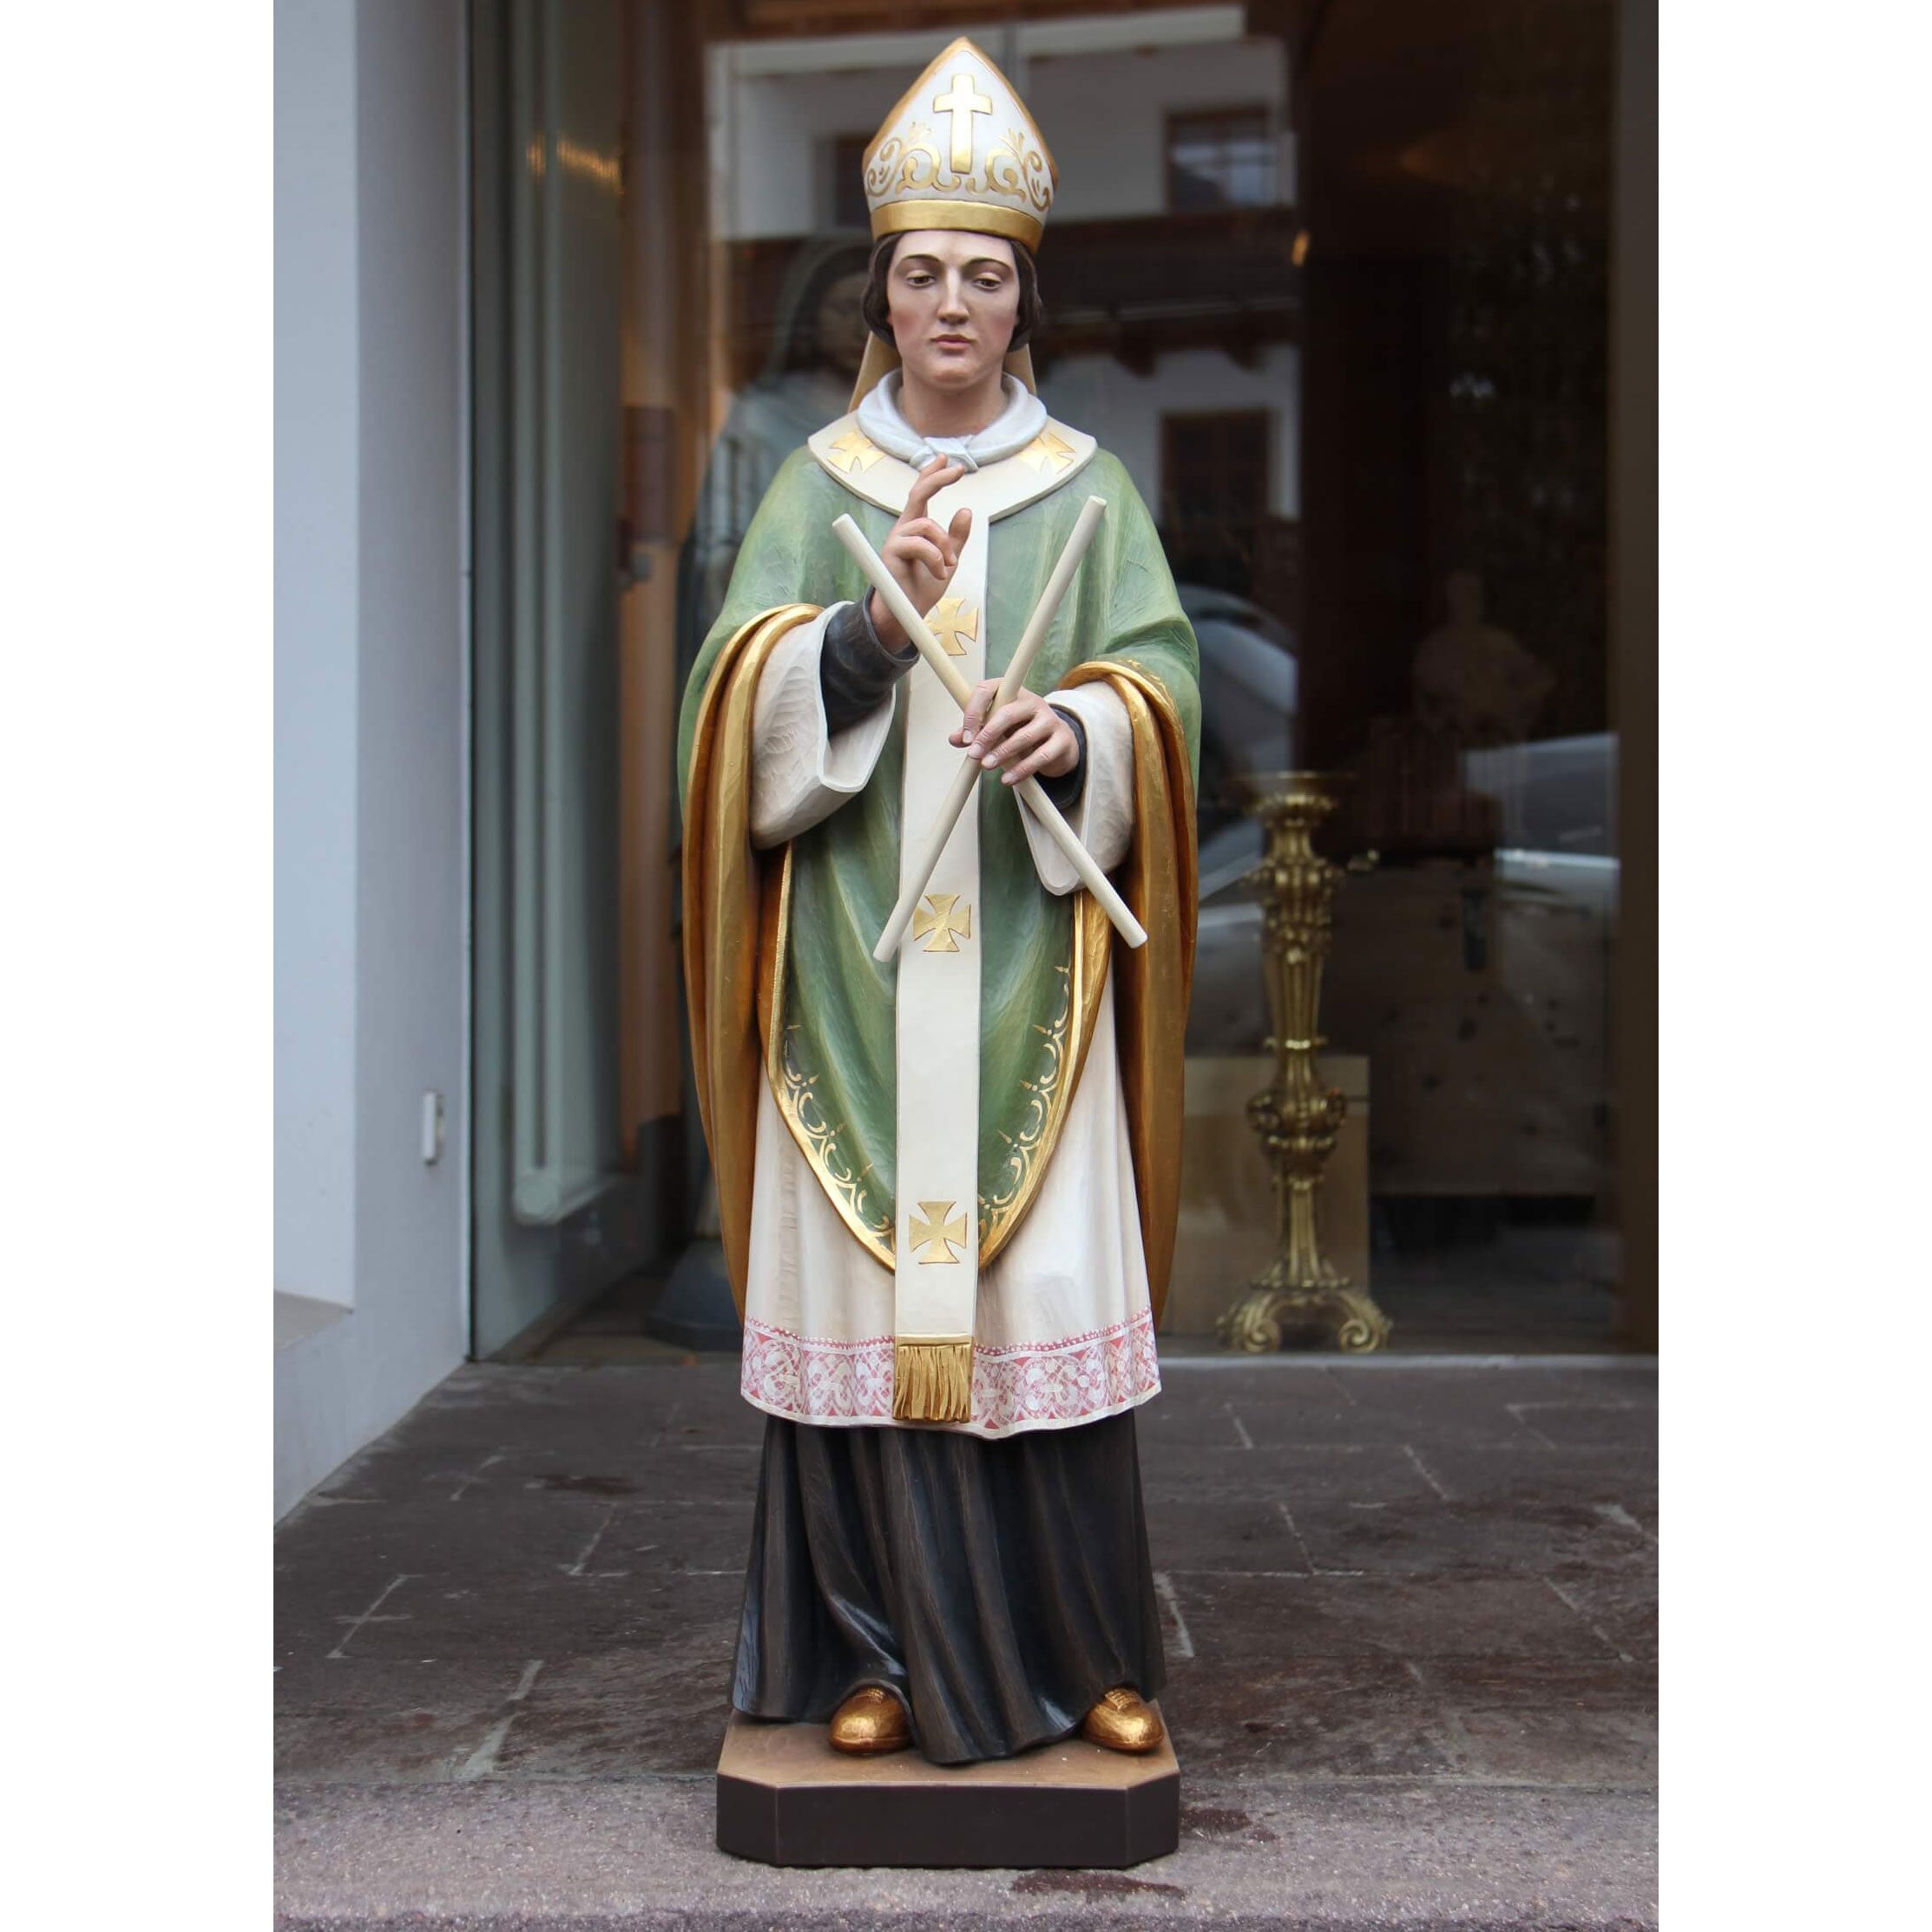 St Blaise | Wood Carved Statue